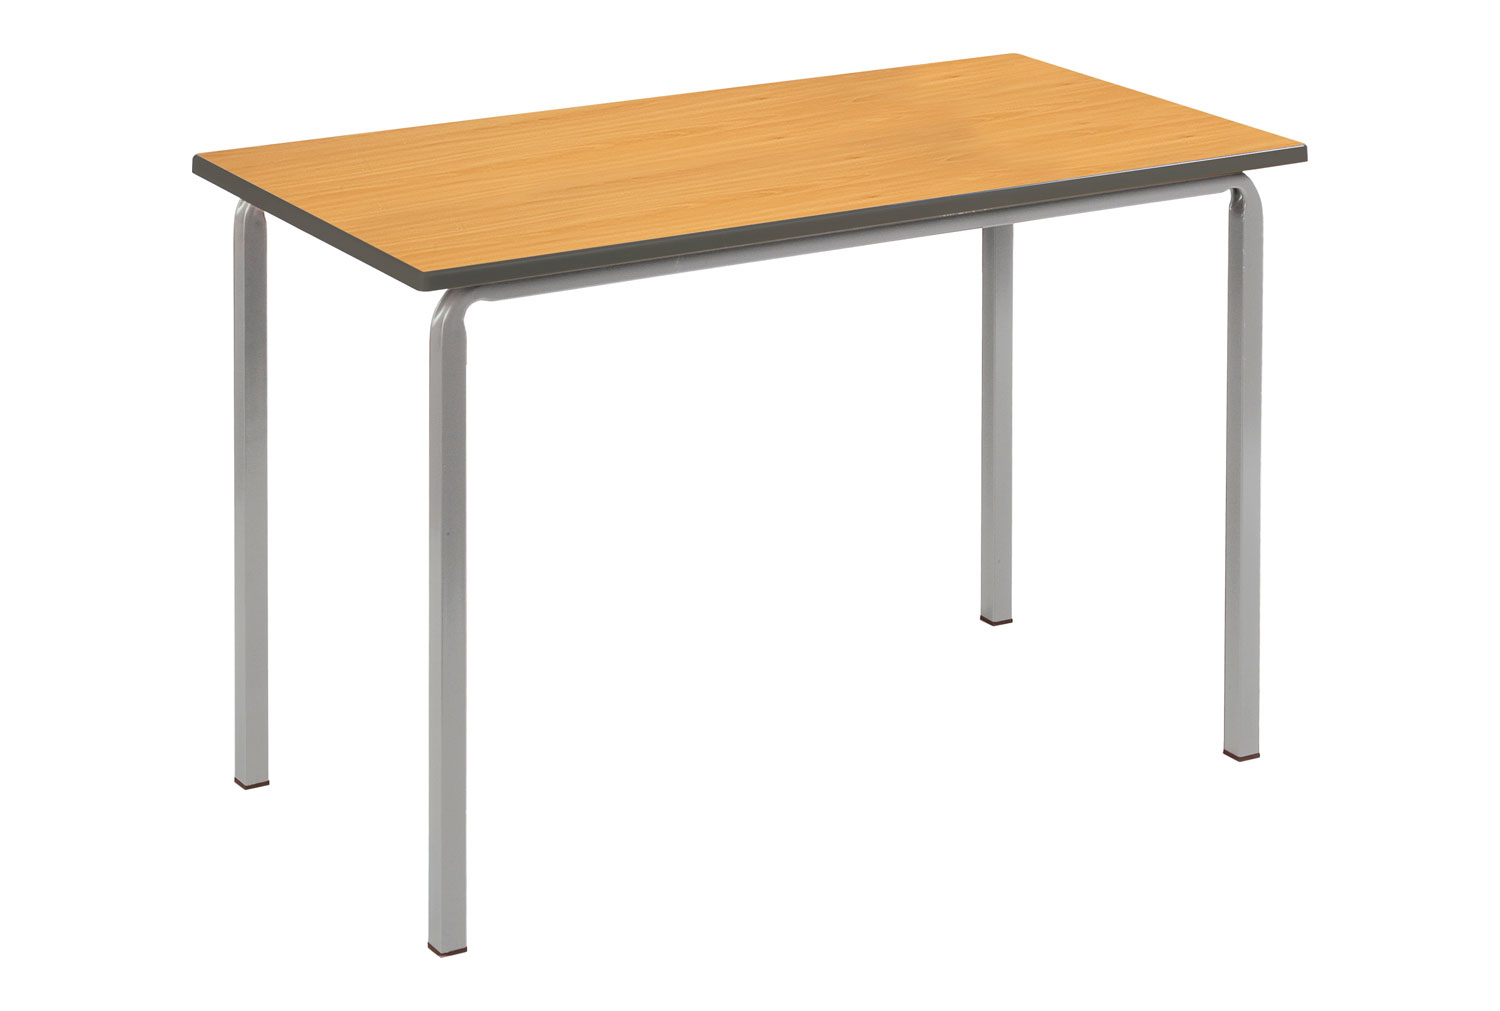 Qty 4 - Reliance Rectangular Non Stacking Classroom Tables 11-14 Years, 120wx60dx71h (cm), Charcoal Frame, Beech Top, PU Blue Edge